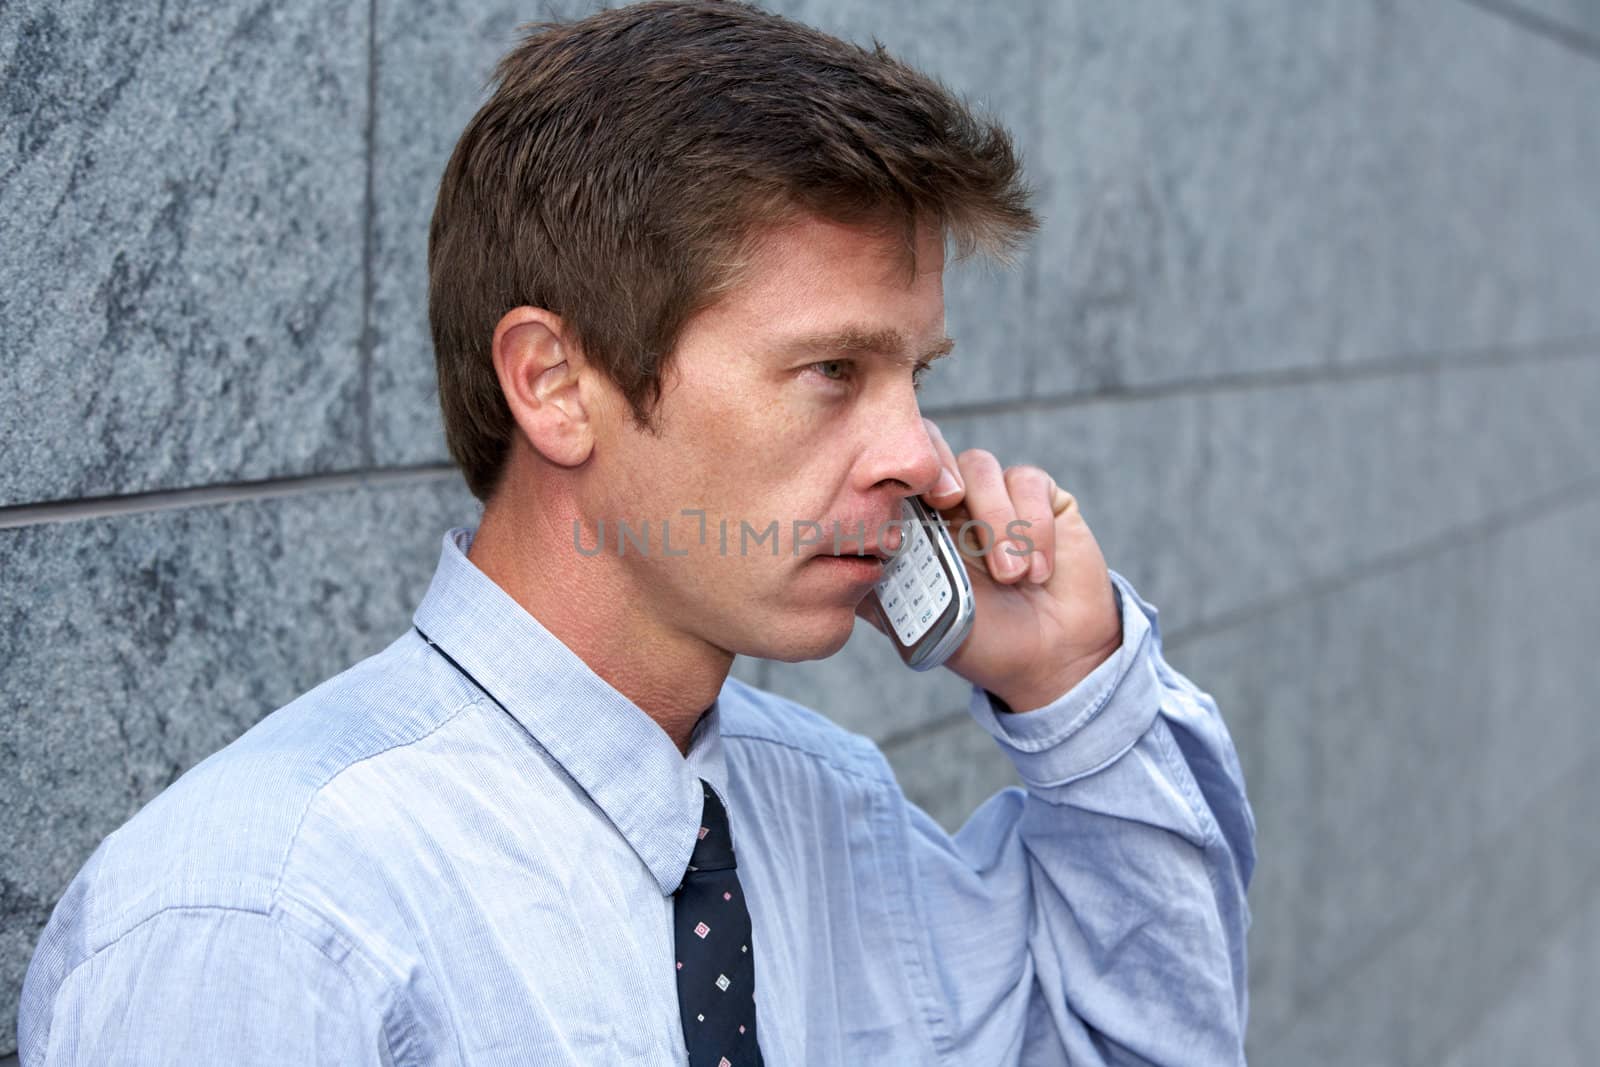 Man using cell phone by building wall